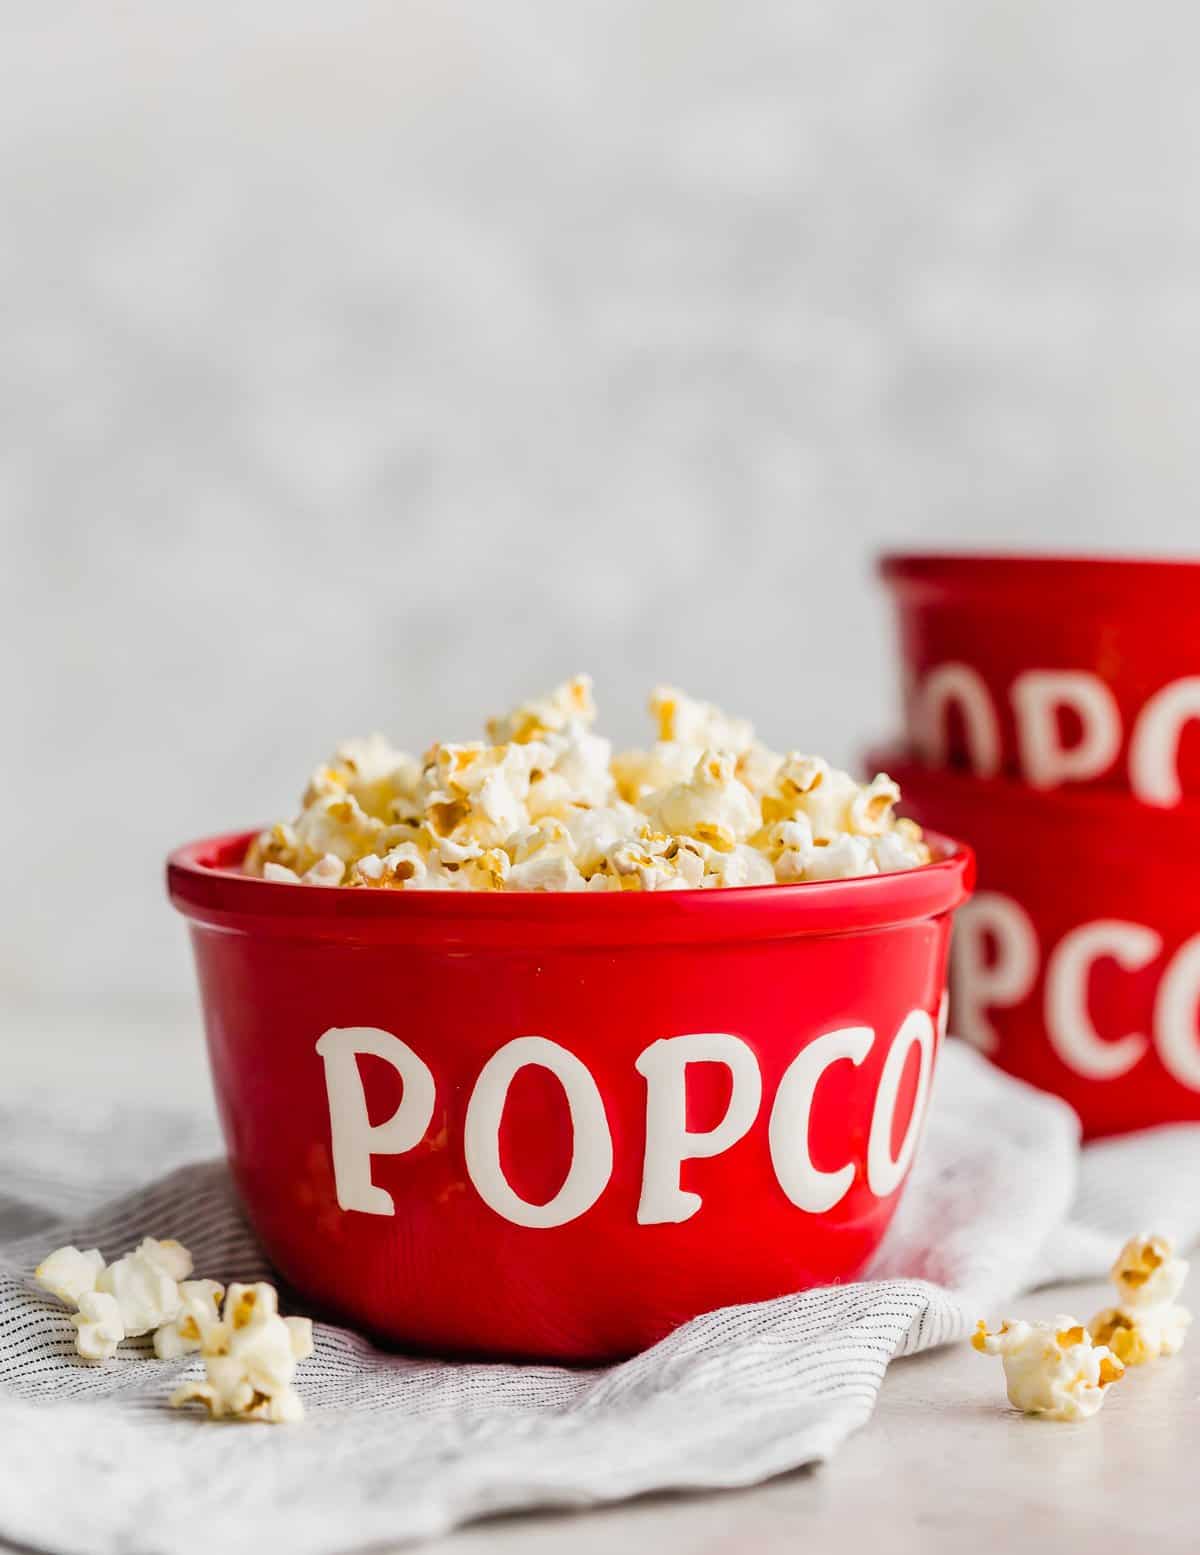 A red bowl with the word "popcorn" on it, with Movie Theater Popcorn inside the bowl.